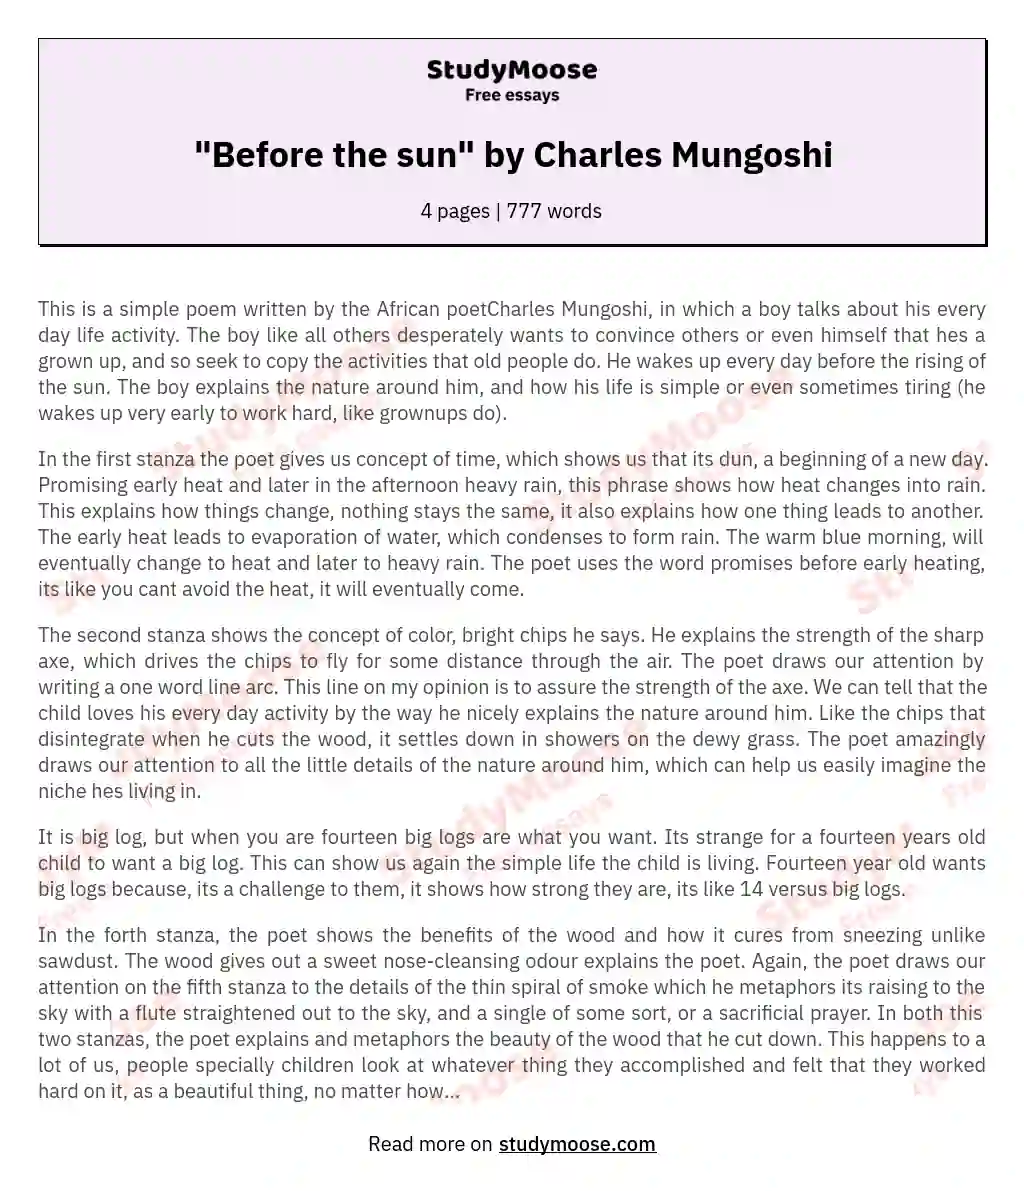 "Before the sun" by Charles Mungoshi essay